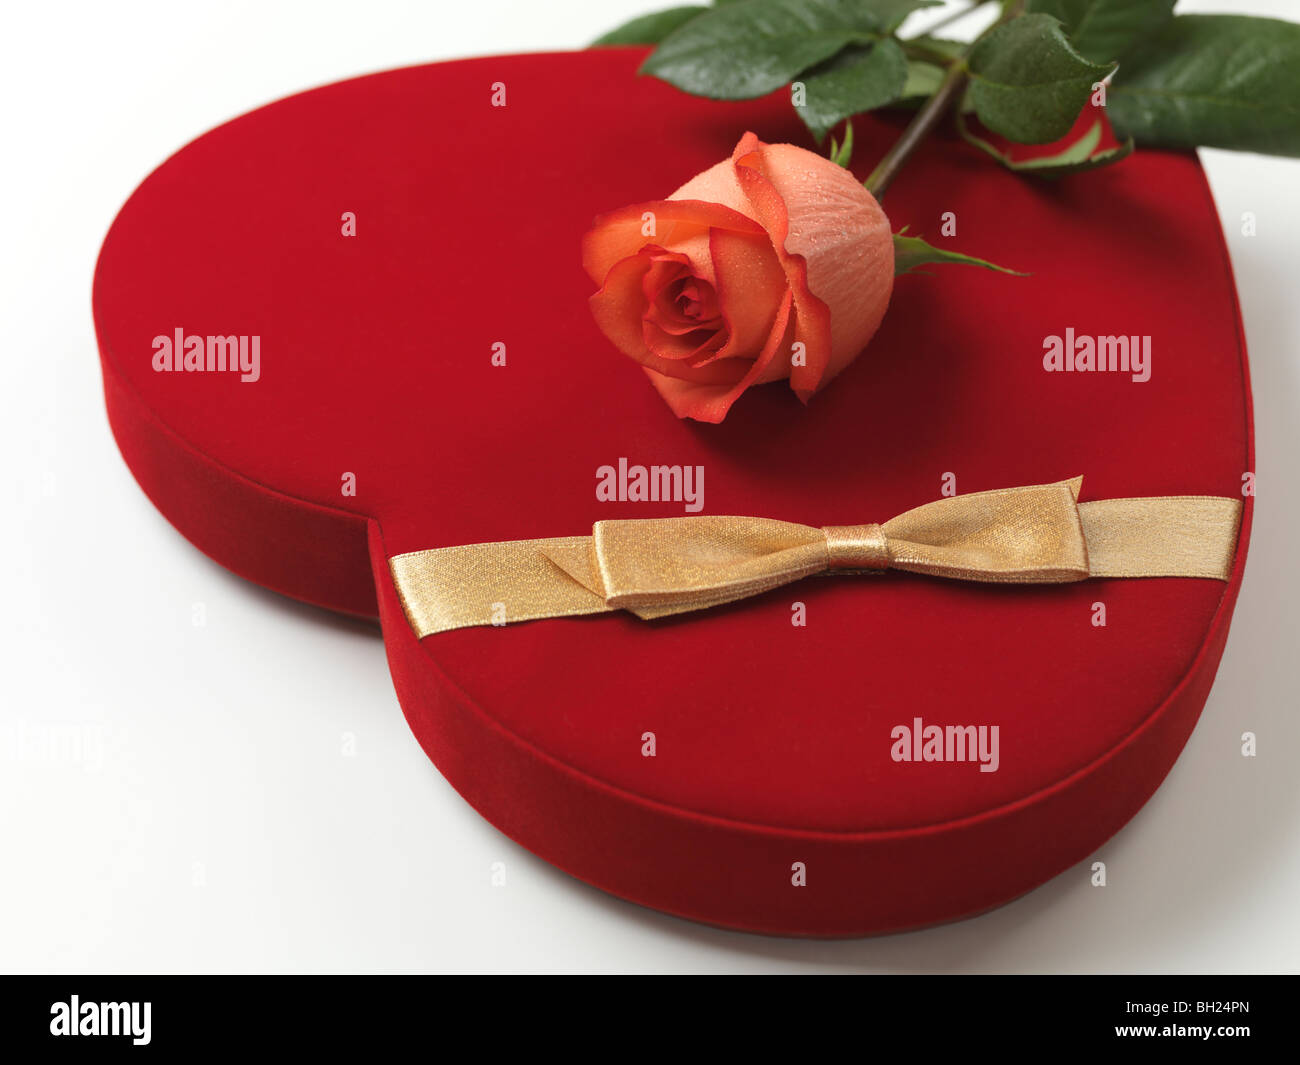 Red heart-shaped gift box and a pink rose Stock Photo